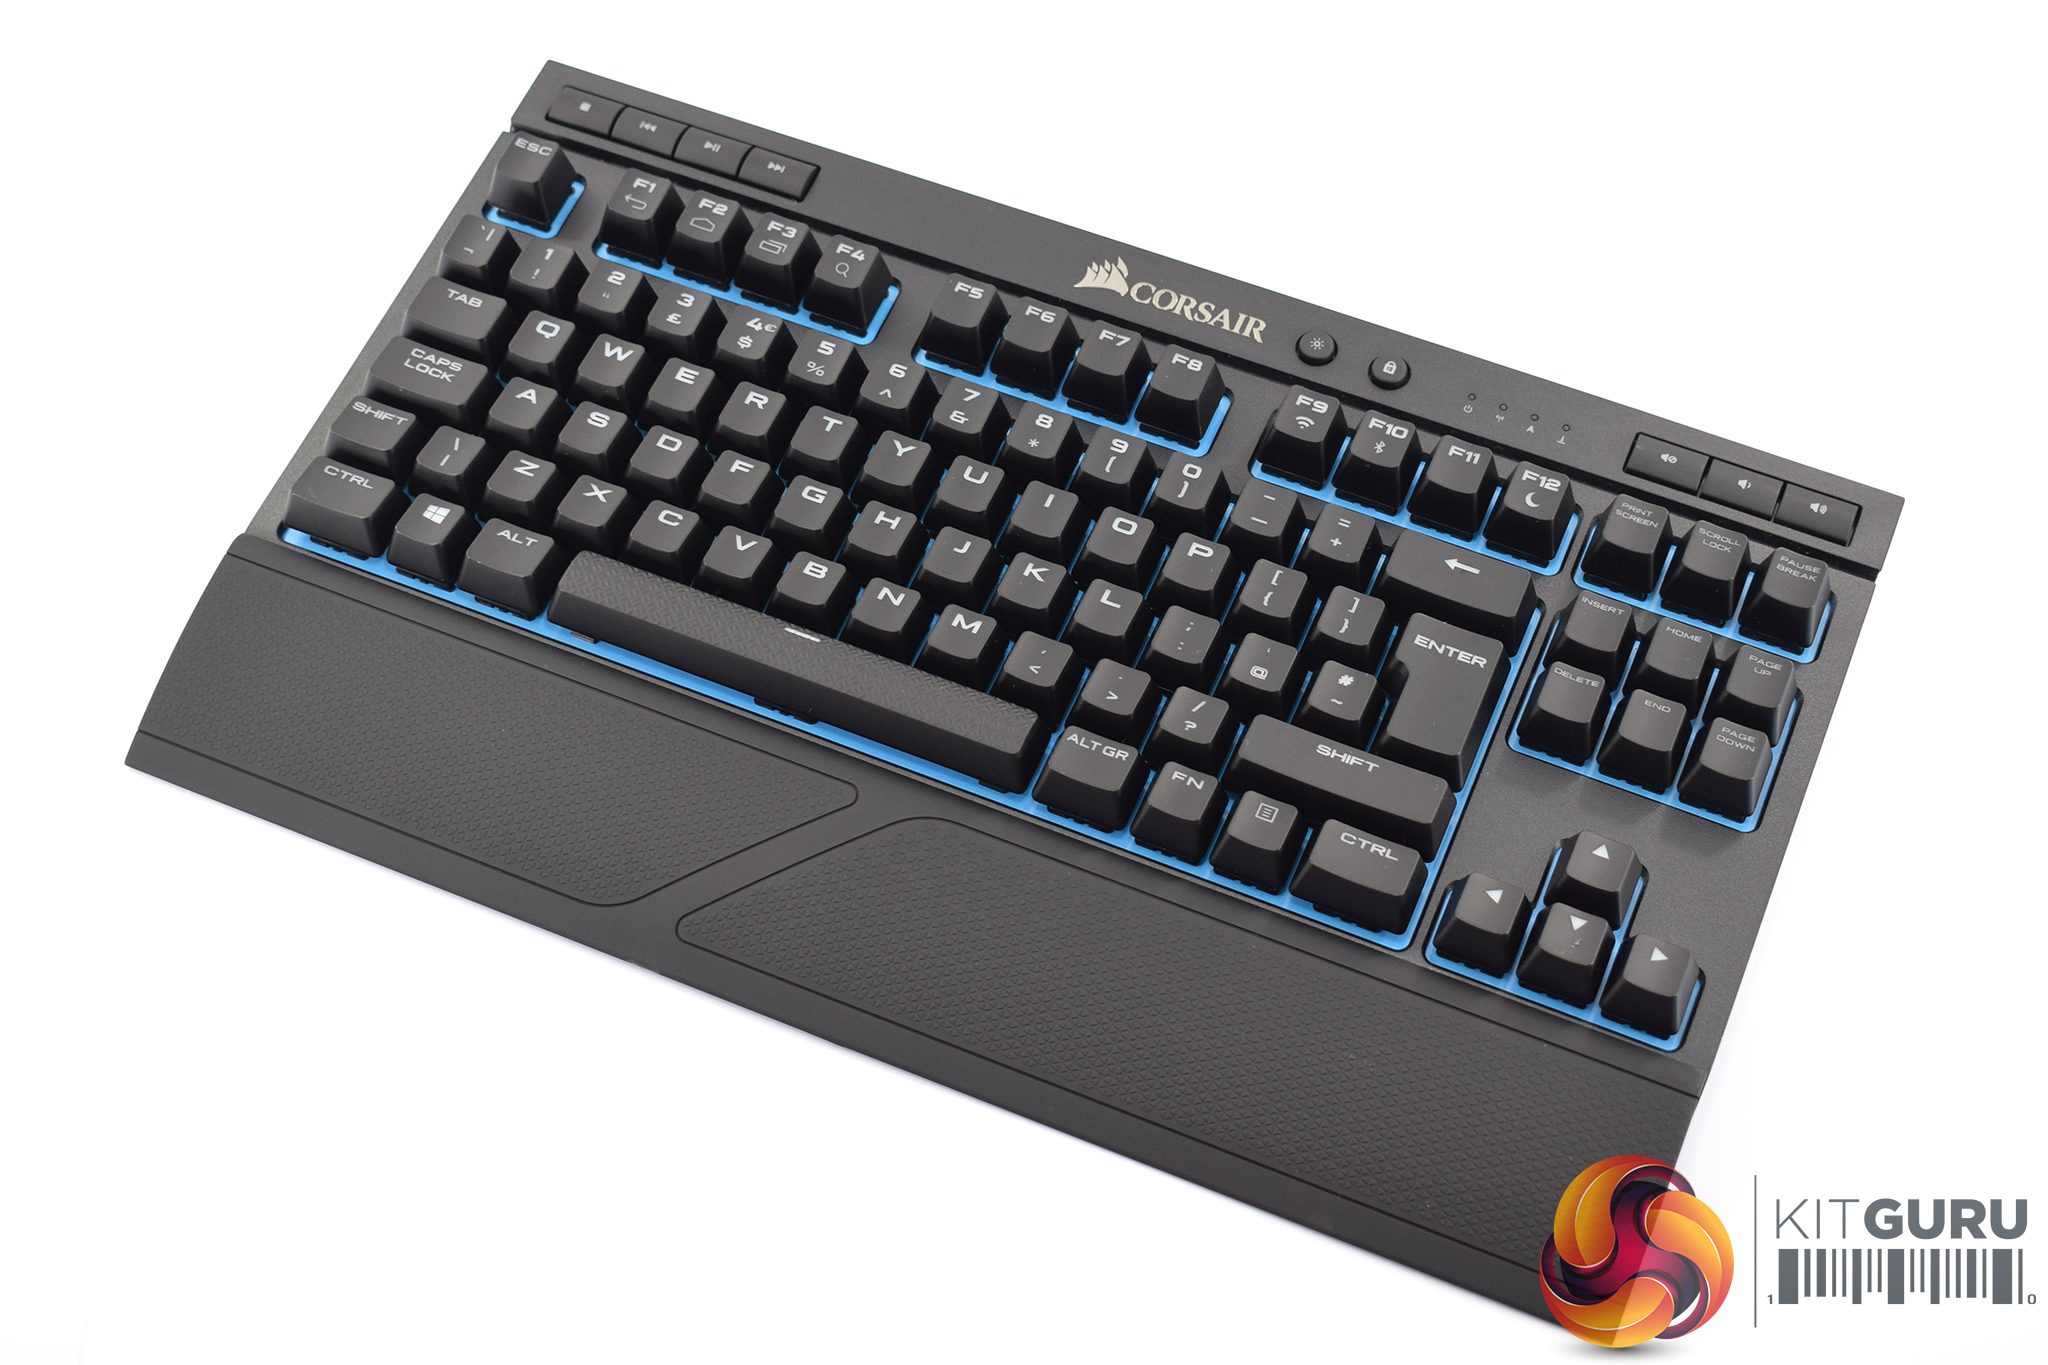 Corsair at CES 2018: Wireless K63 Mechanical Keyboard with